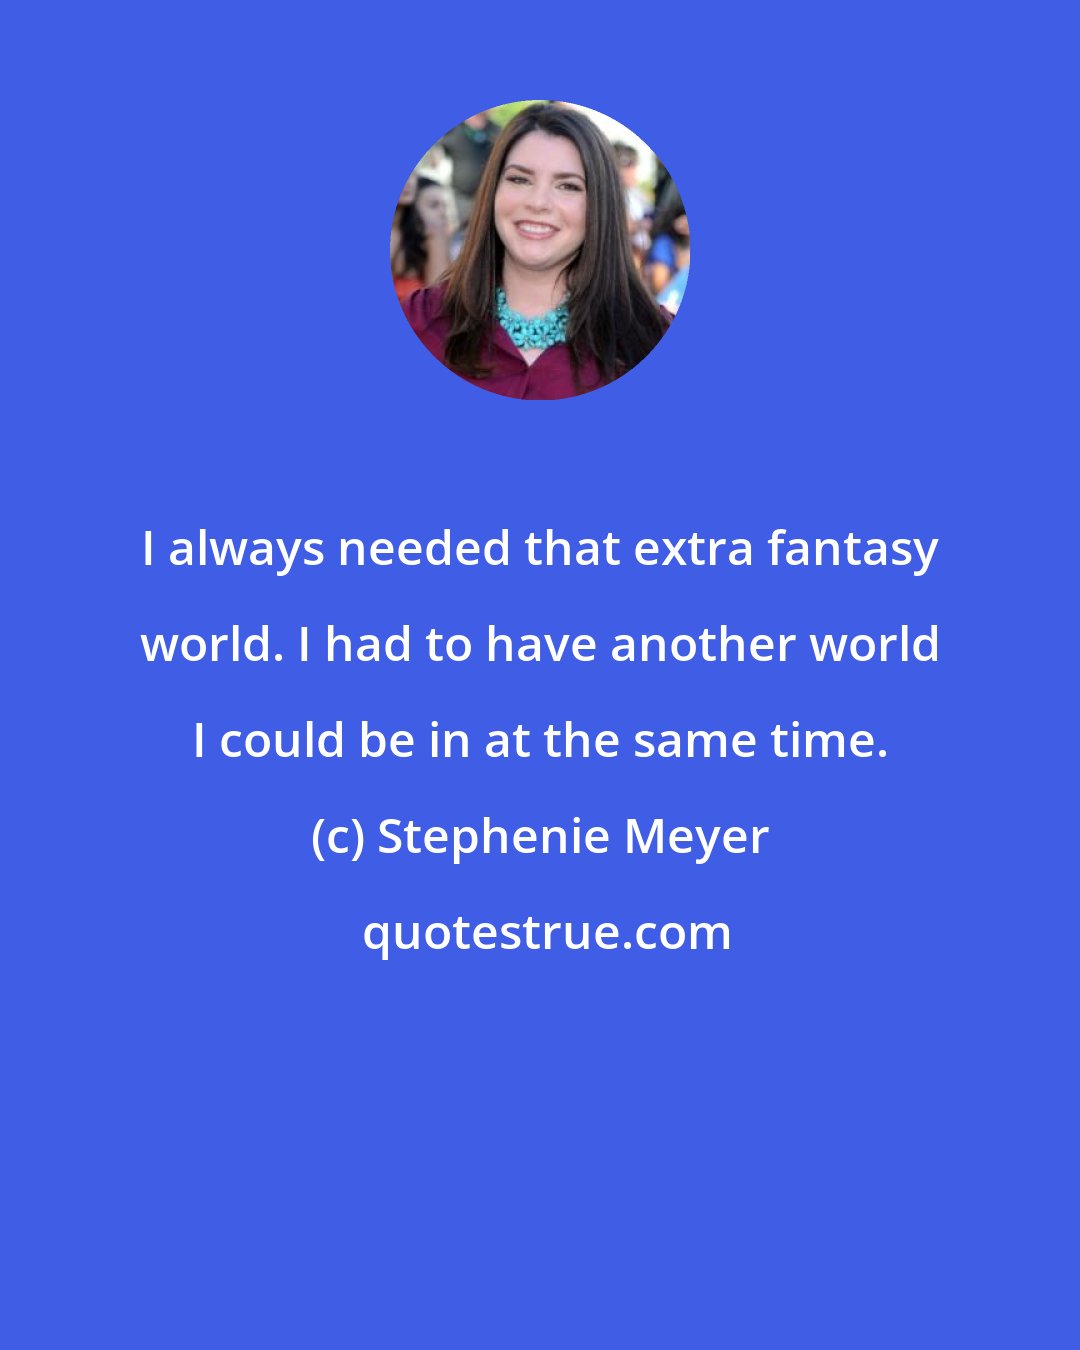 Stephenie Meyer: I always needed that extra fantasy world. I had to have another world I could be in at the same time.